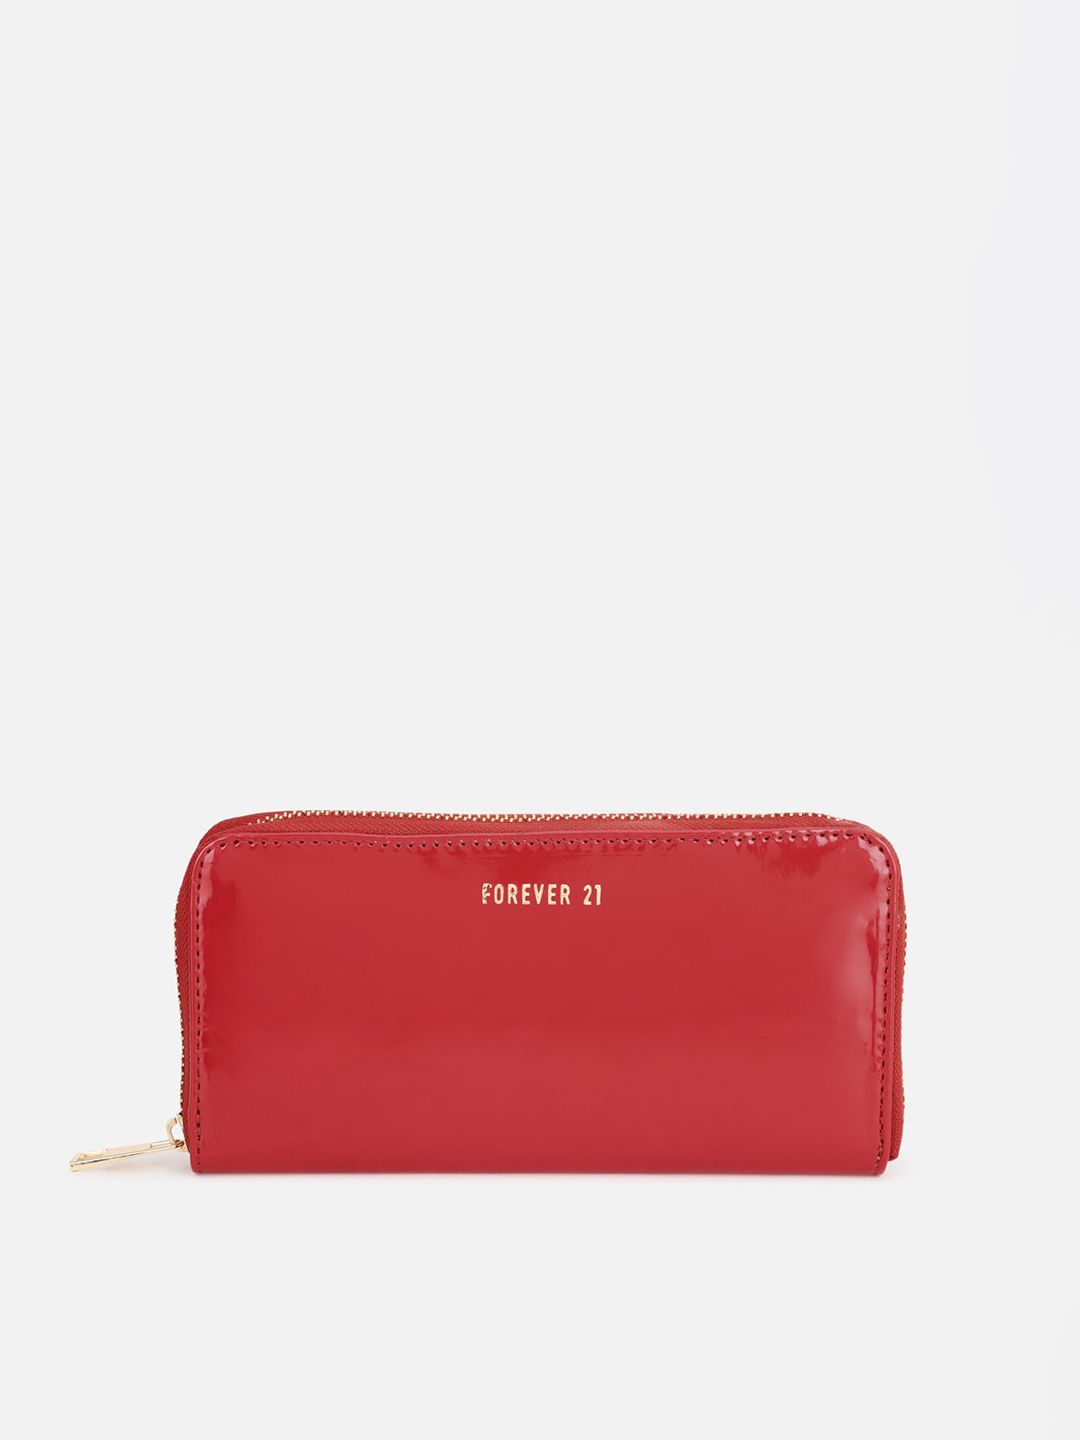 FOREVER 21 Women Red & Gold-Toned PU Zip Around Wallet Price in India